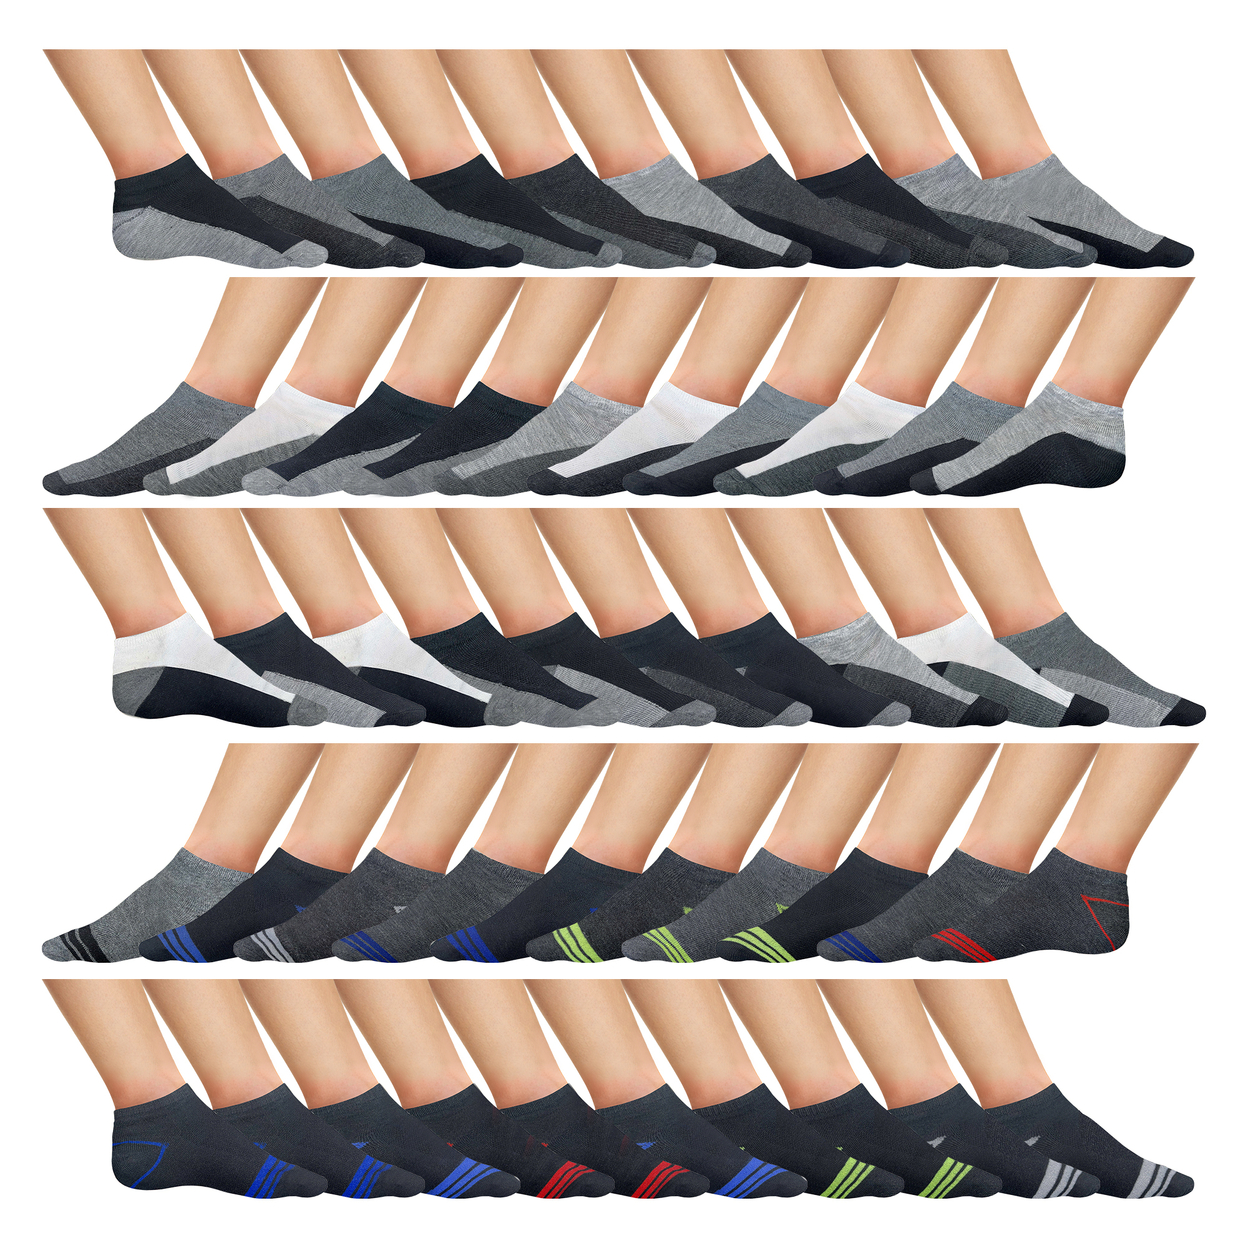 Multi-Pairs: Men's Moisture Wicking Performance Mesh Running Active Low-Cut Athletic Ankle Socks - 20-pairs